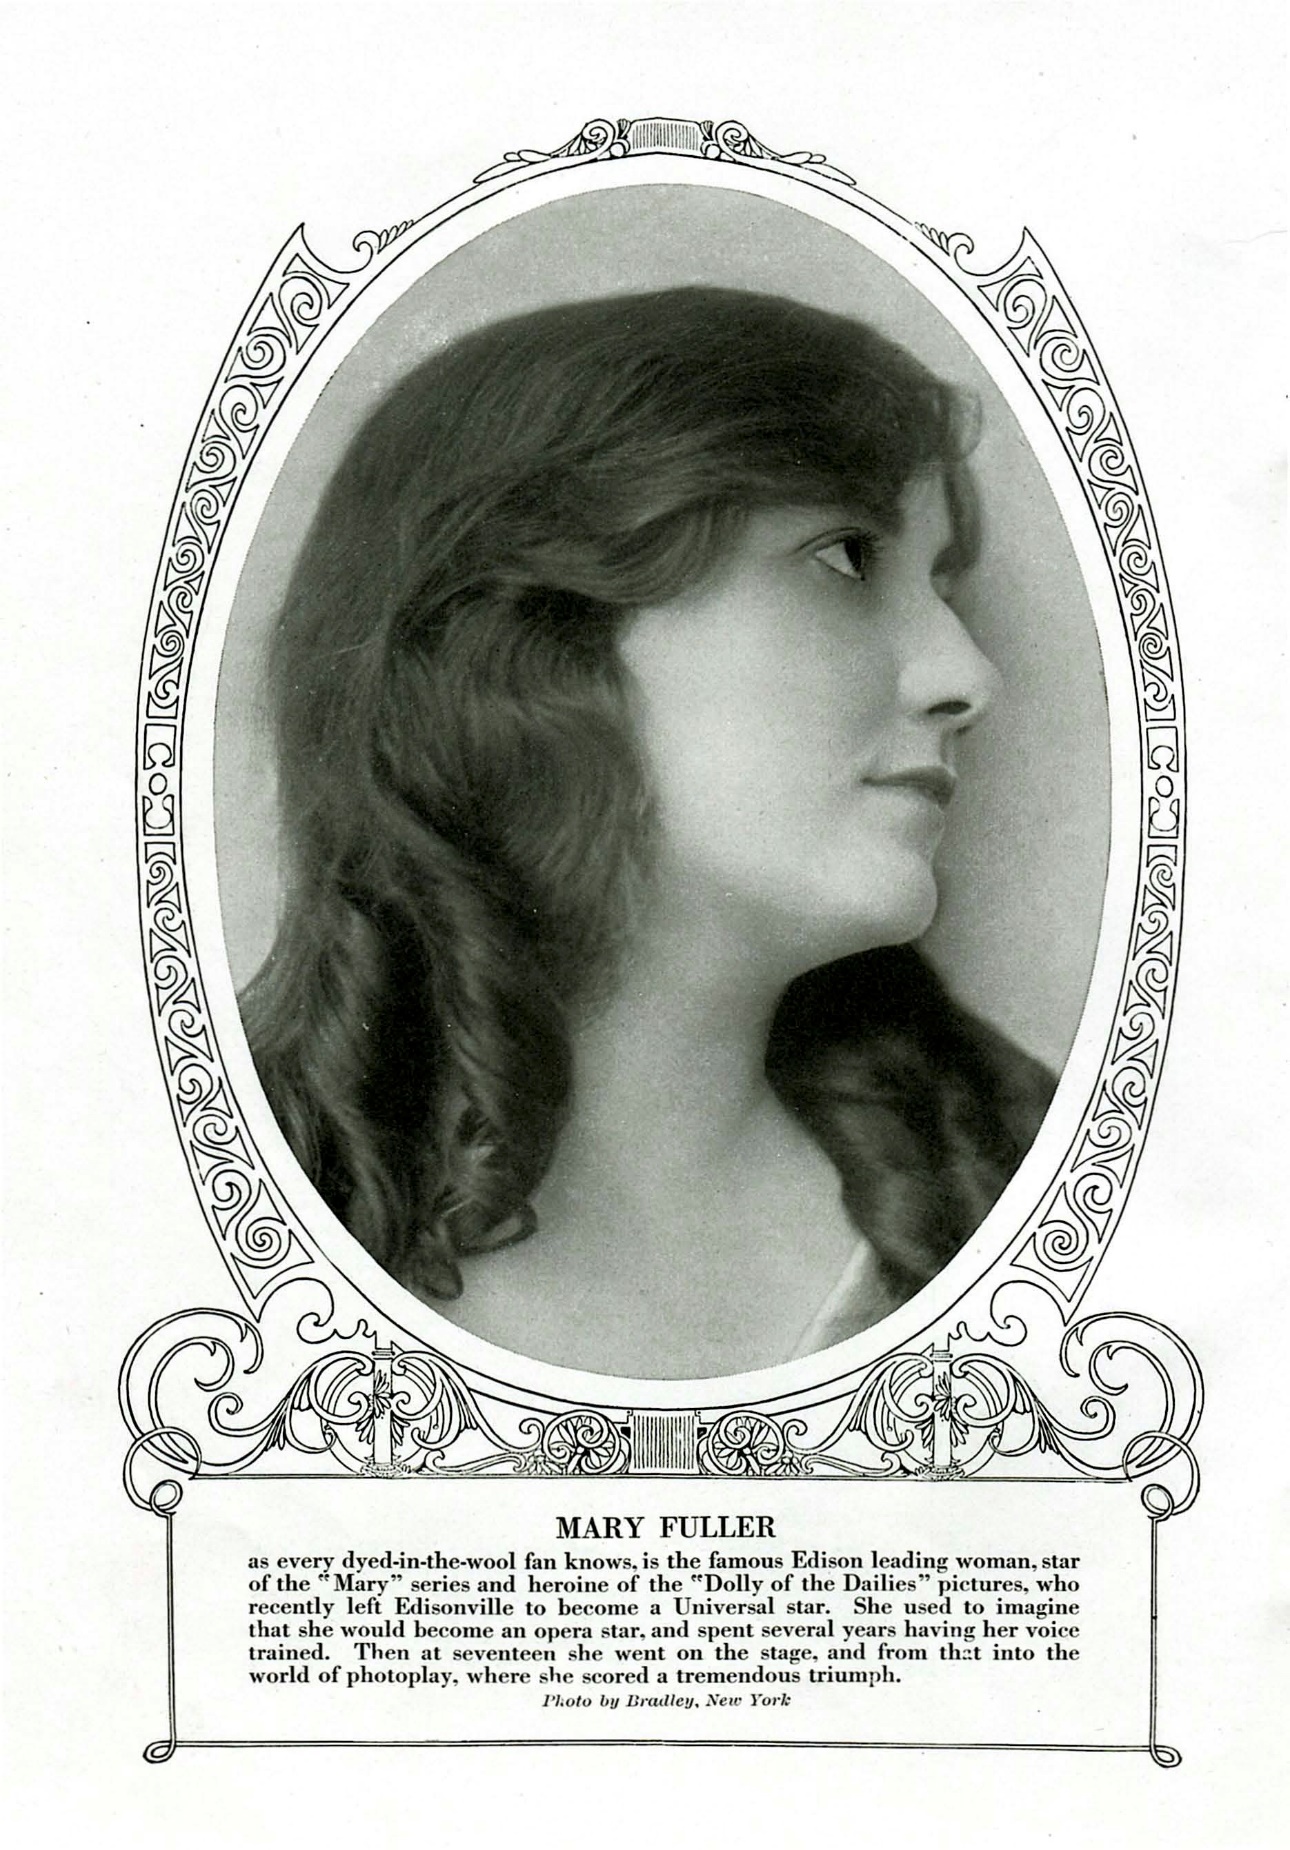 Promotional portrait of Mary Fuller appealing to 'dyed-in-the-wool fans.' Photoplay, November 1914.